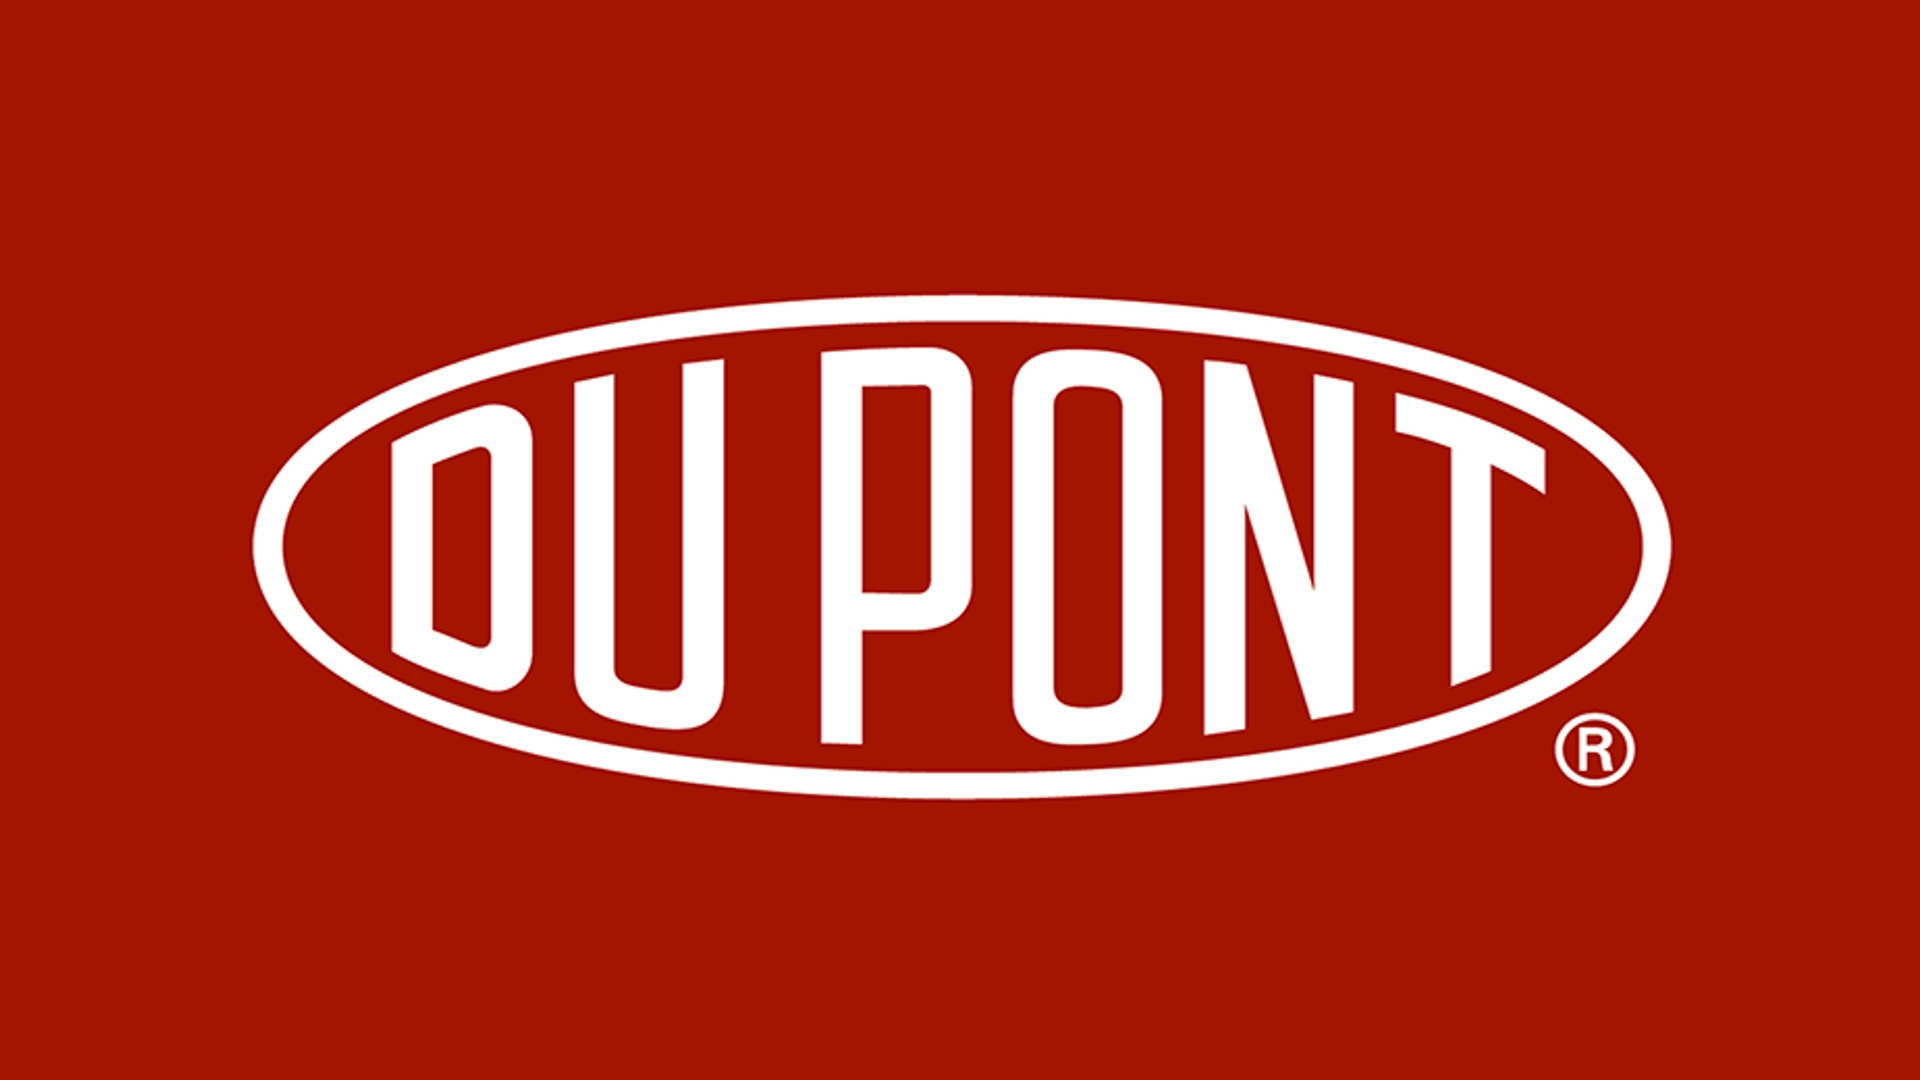 dupont-featured-image